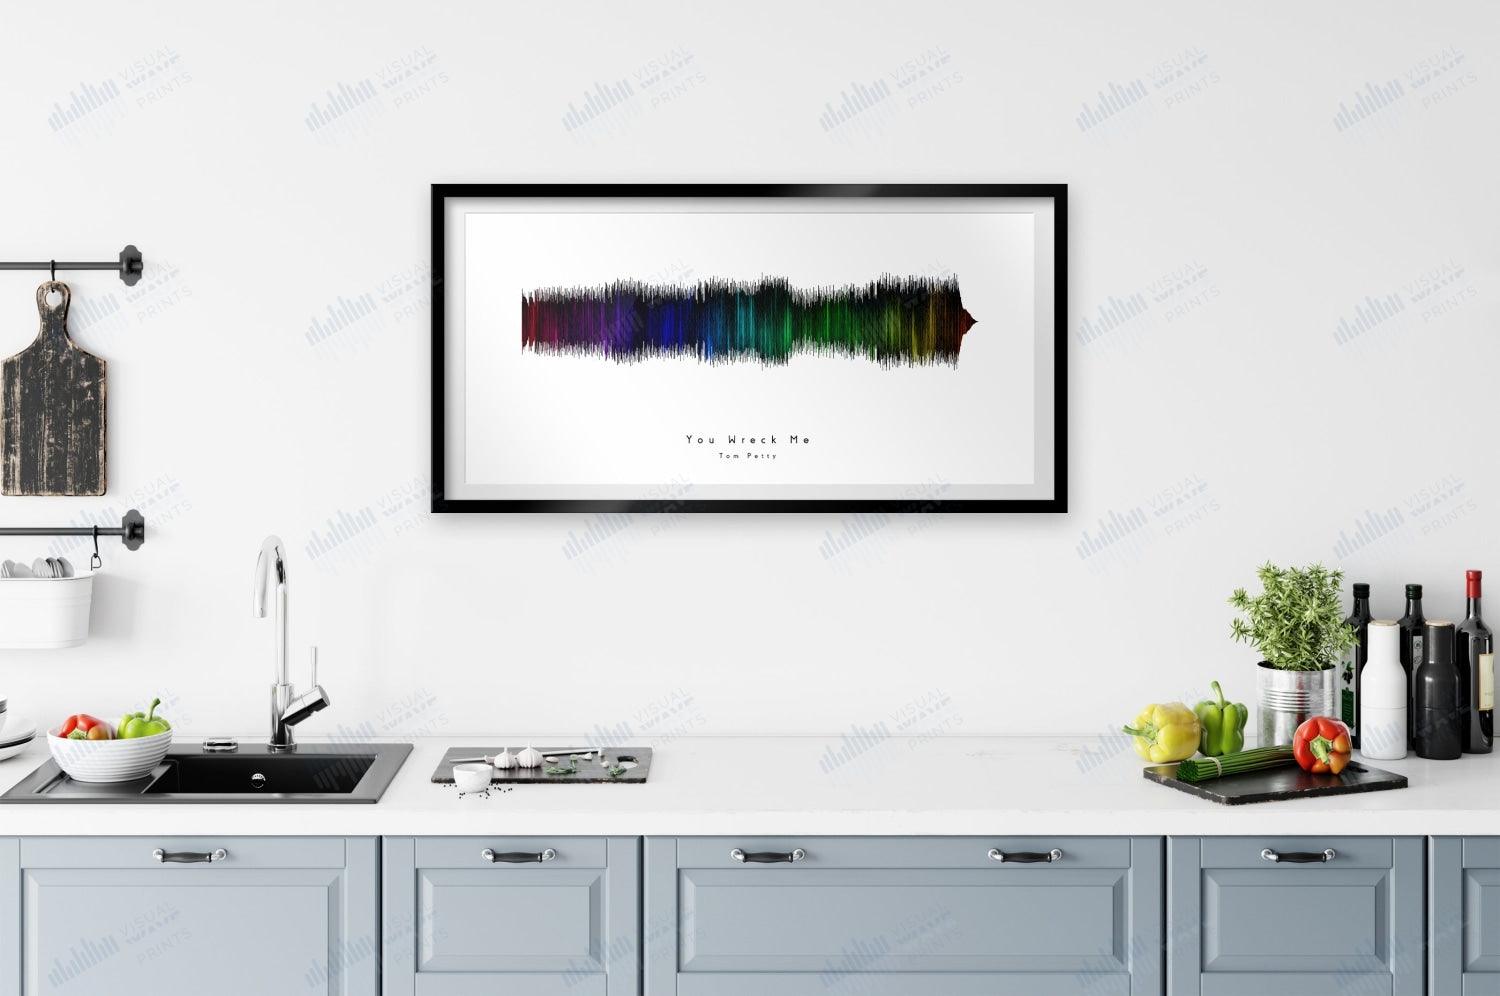 You Wreck Me by Tom Petty - Visual Wave Prints